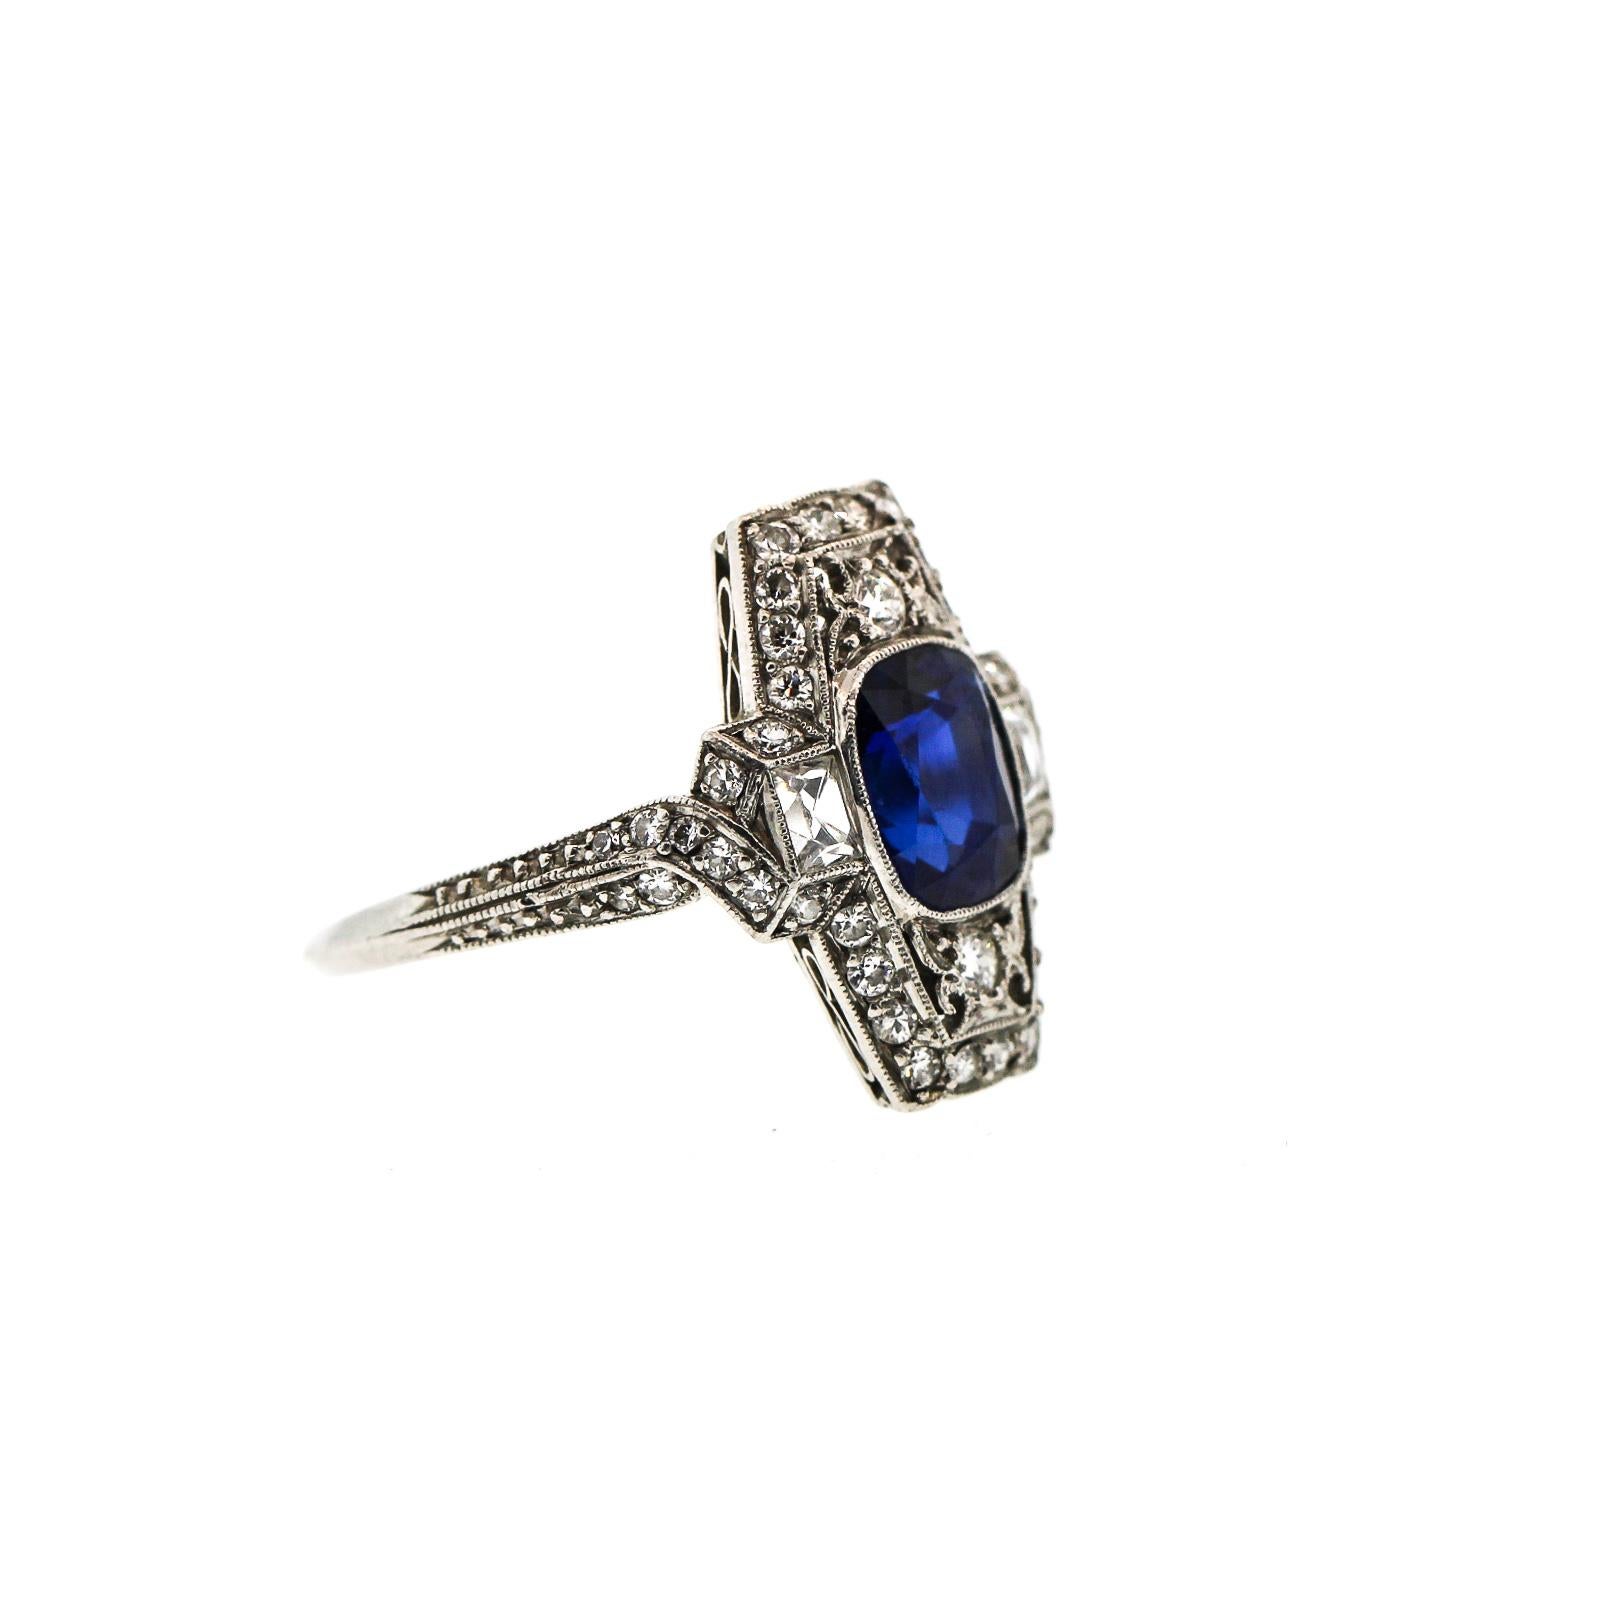 A rare and pristine Art Deco cushion sapphire platinum diamond ring by Tiffany & Co. circa 1925. This ring features a blue cushion shaped sapphire weighing approximately 1.80 ct. The panel ring is set with two French Cut diamonds on the side and